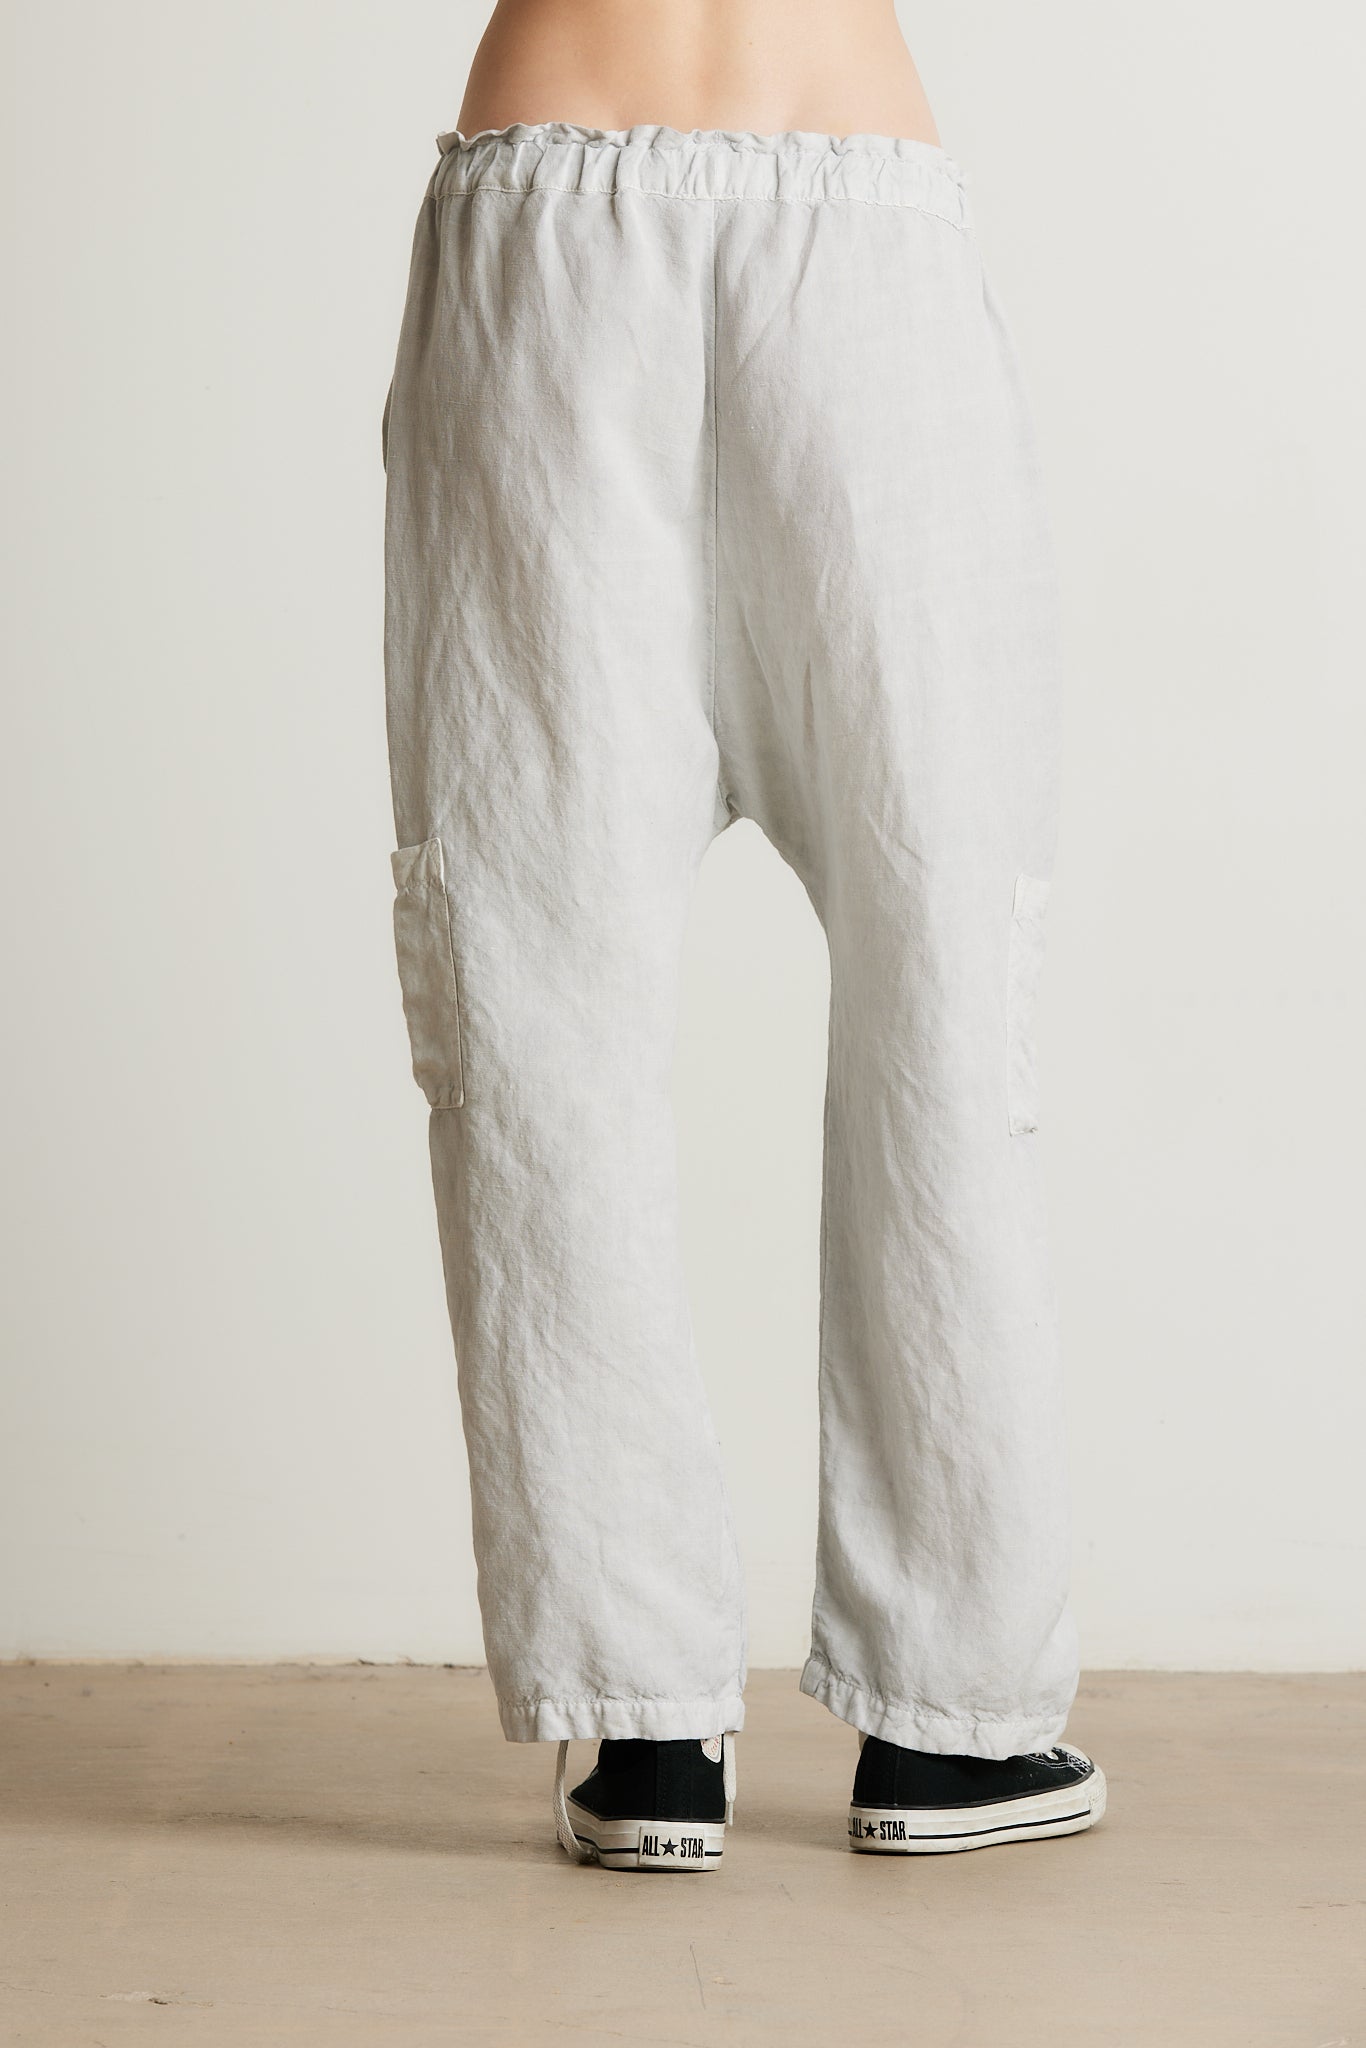 SHAILEY PANT/ PIGMENT SHELL GREY